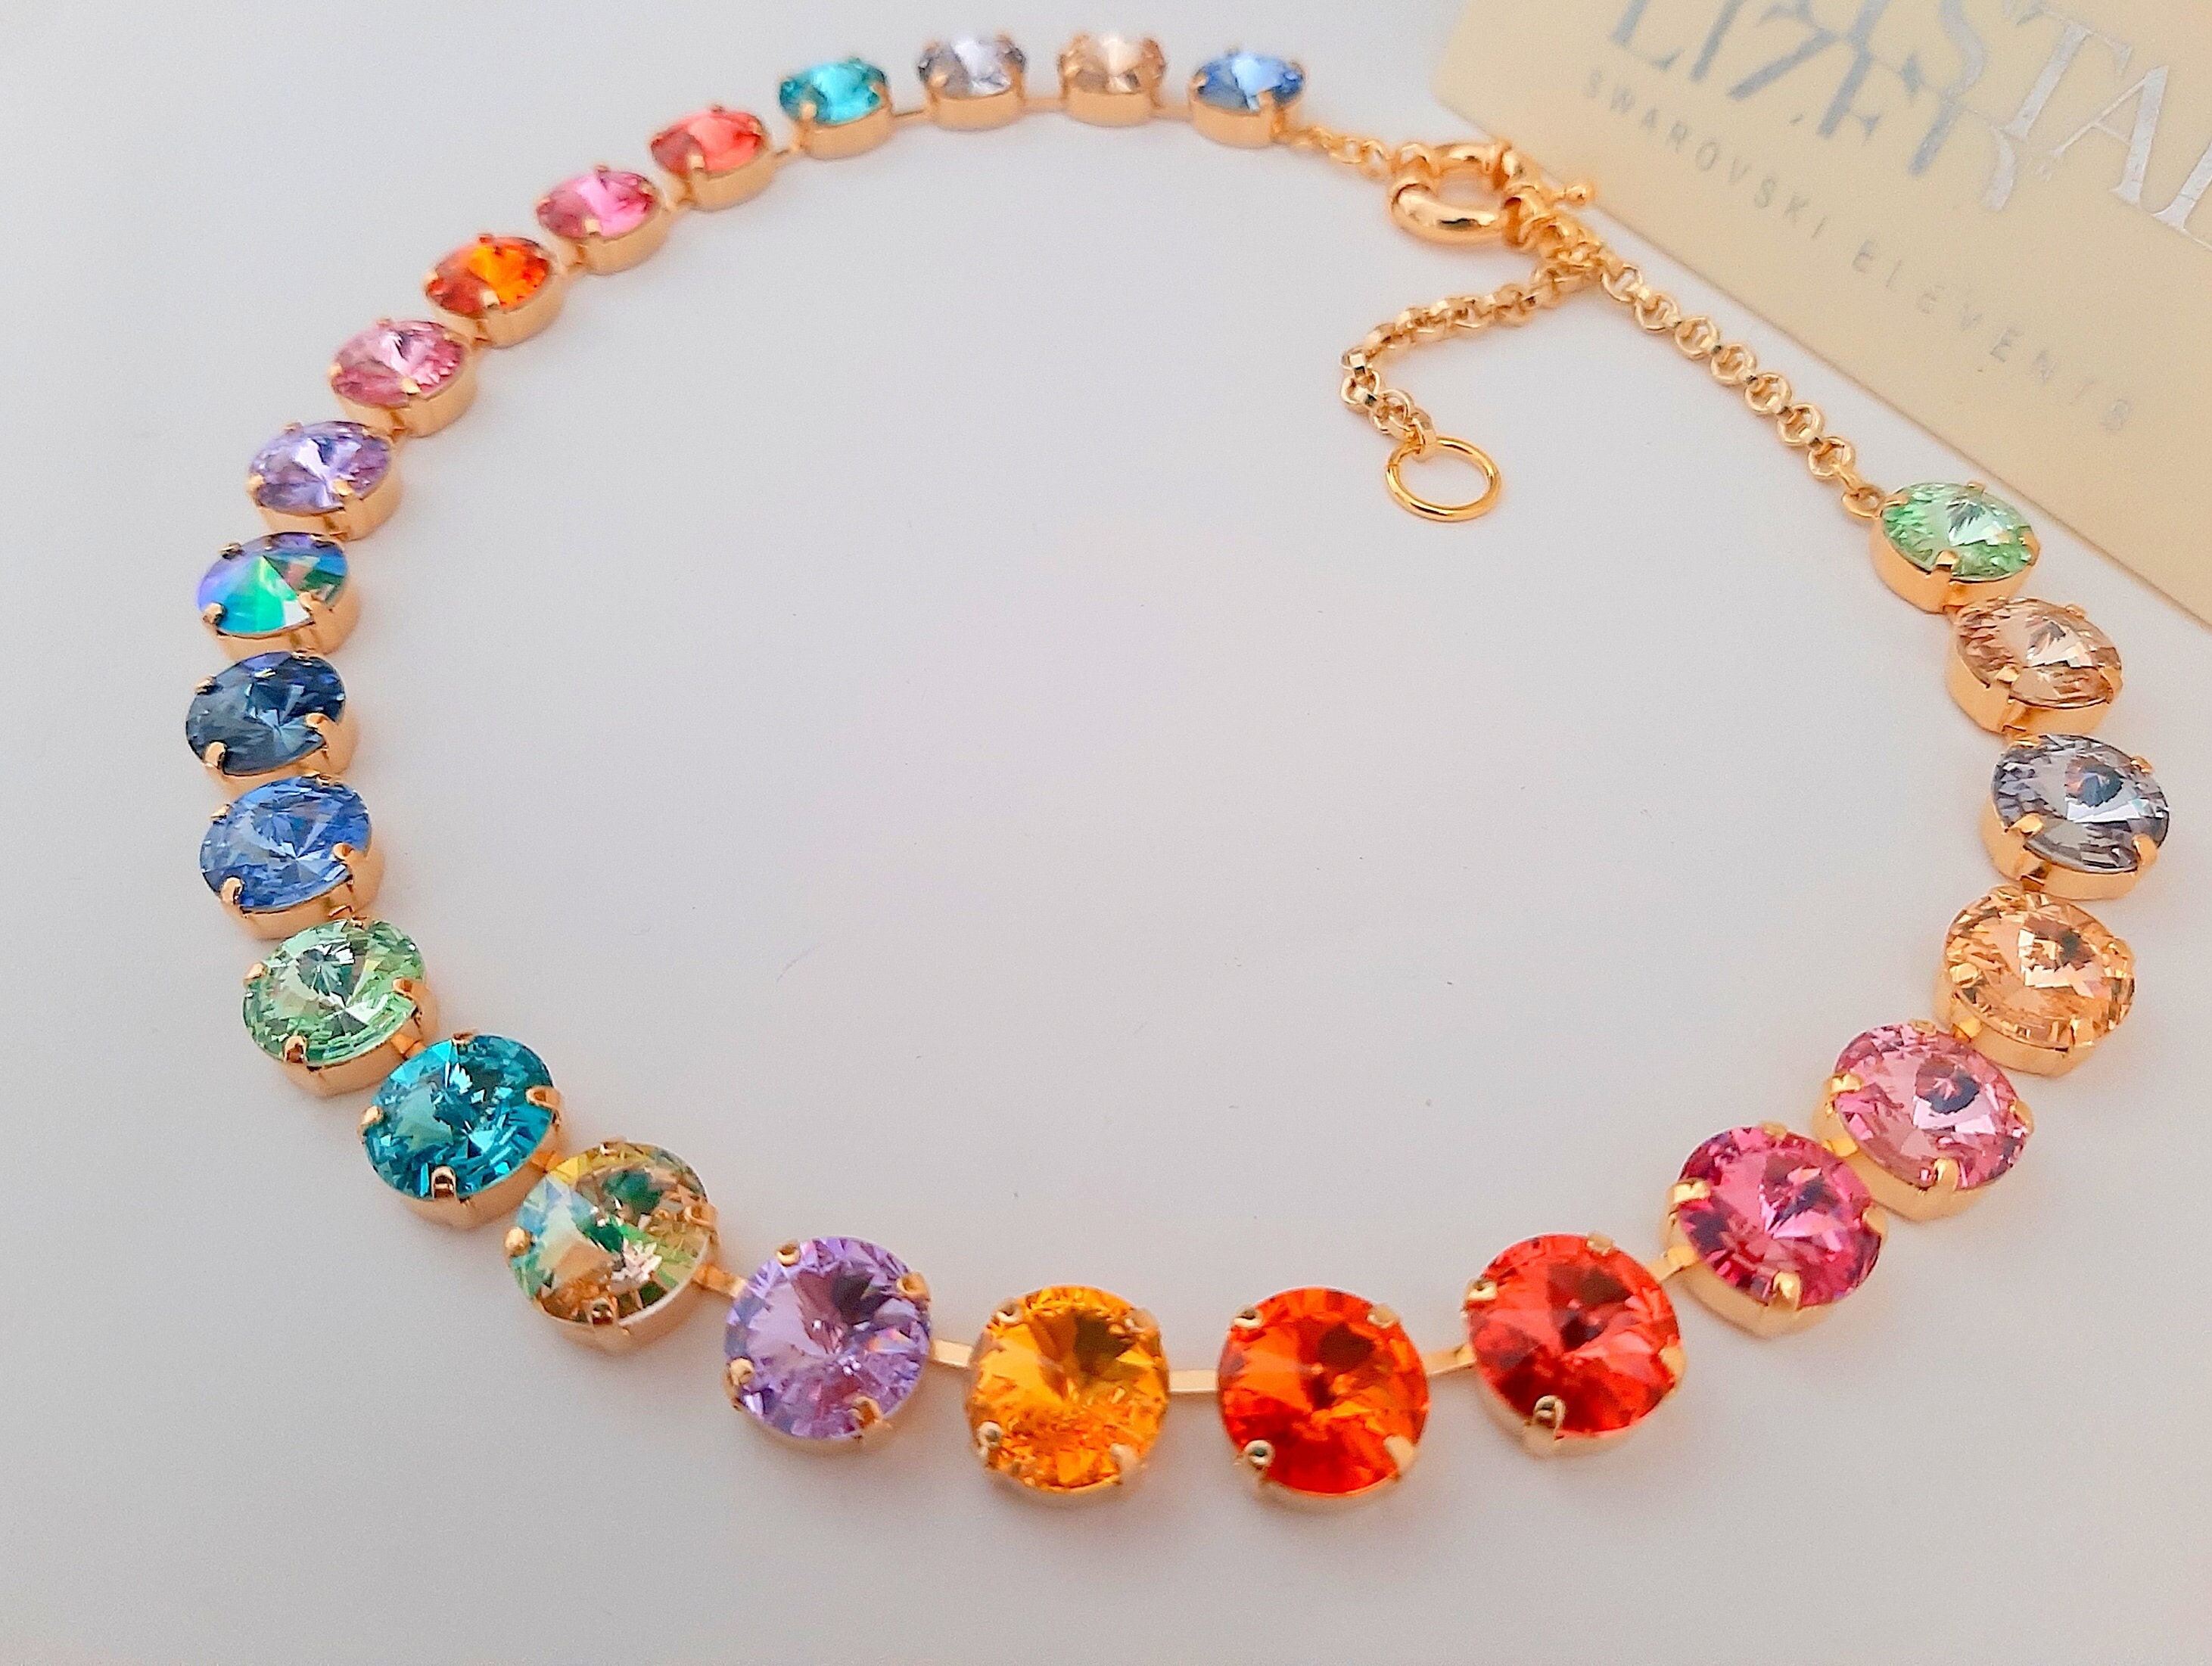 Rainbow Crystal + White Crystal LV Button Necklaces